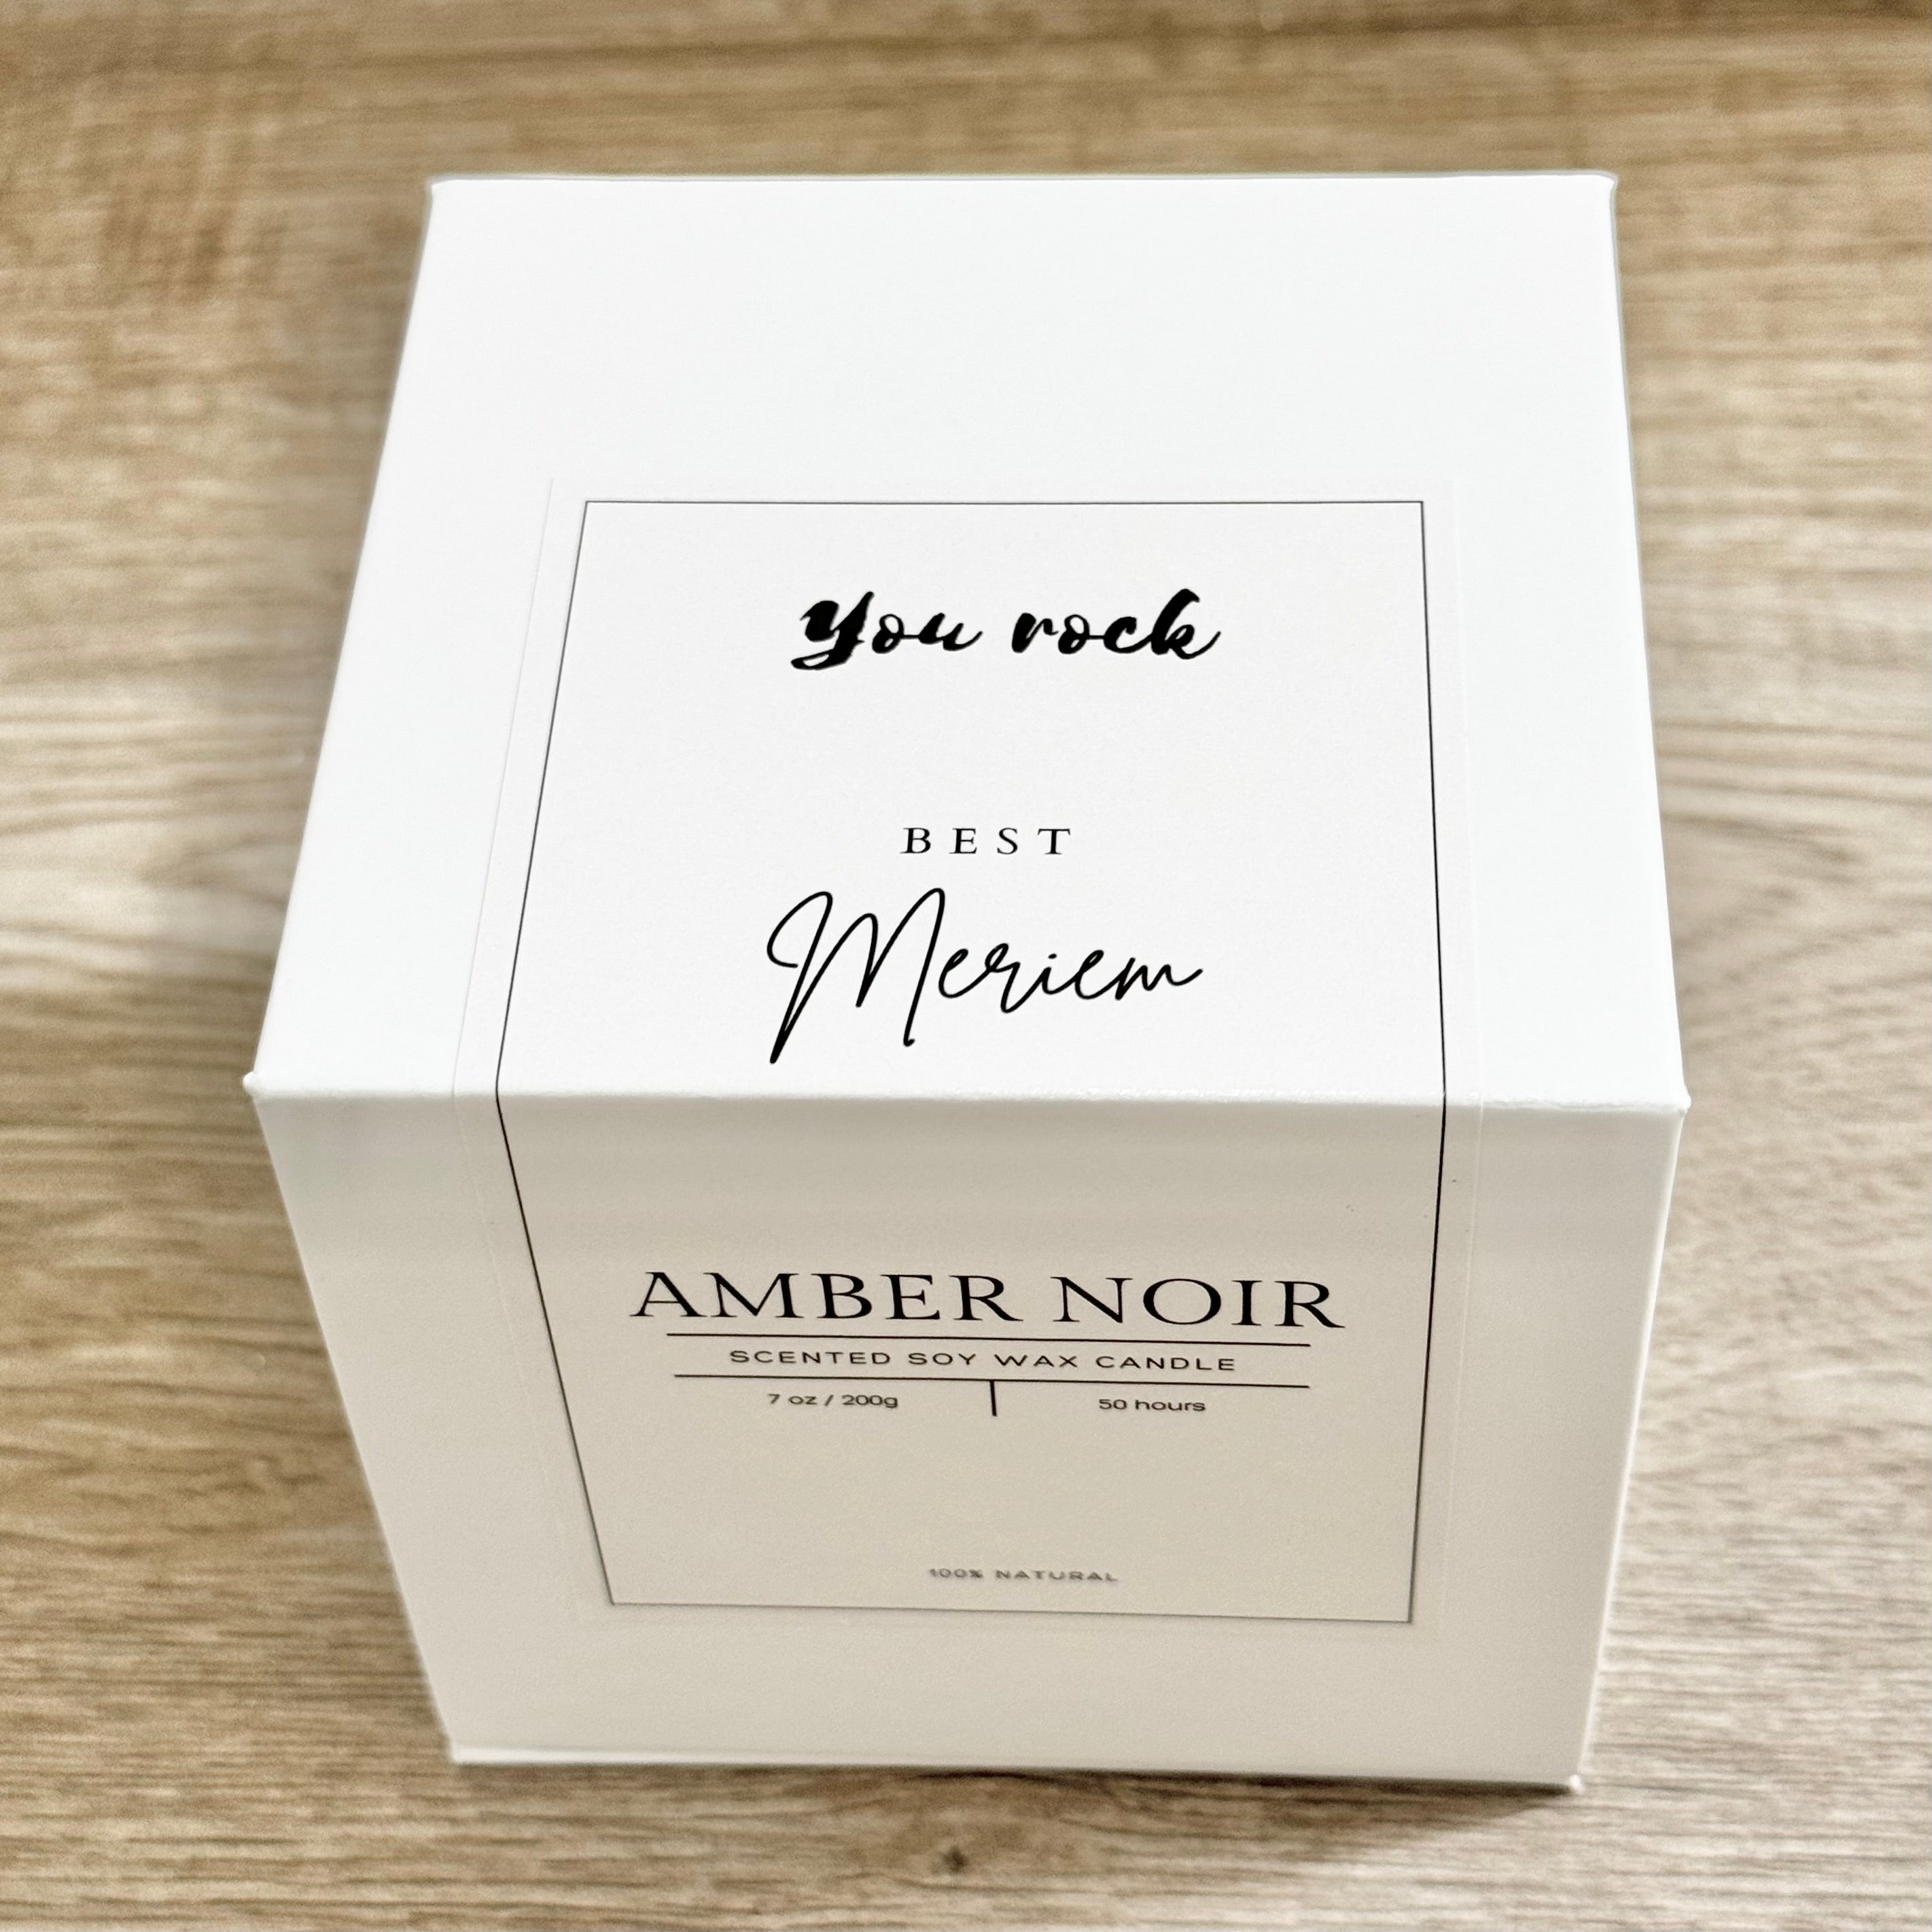 Personalize our New Signature Scented Soy Wax Candle and Gift Box